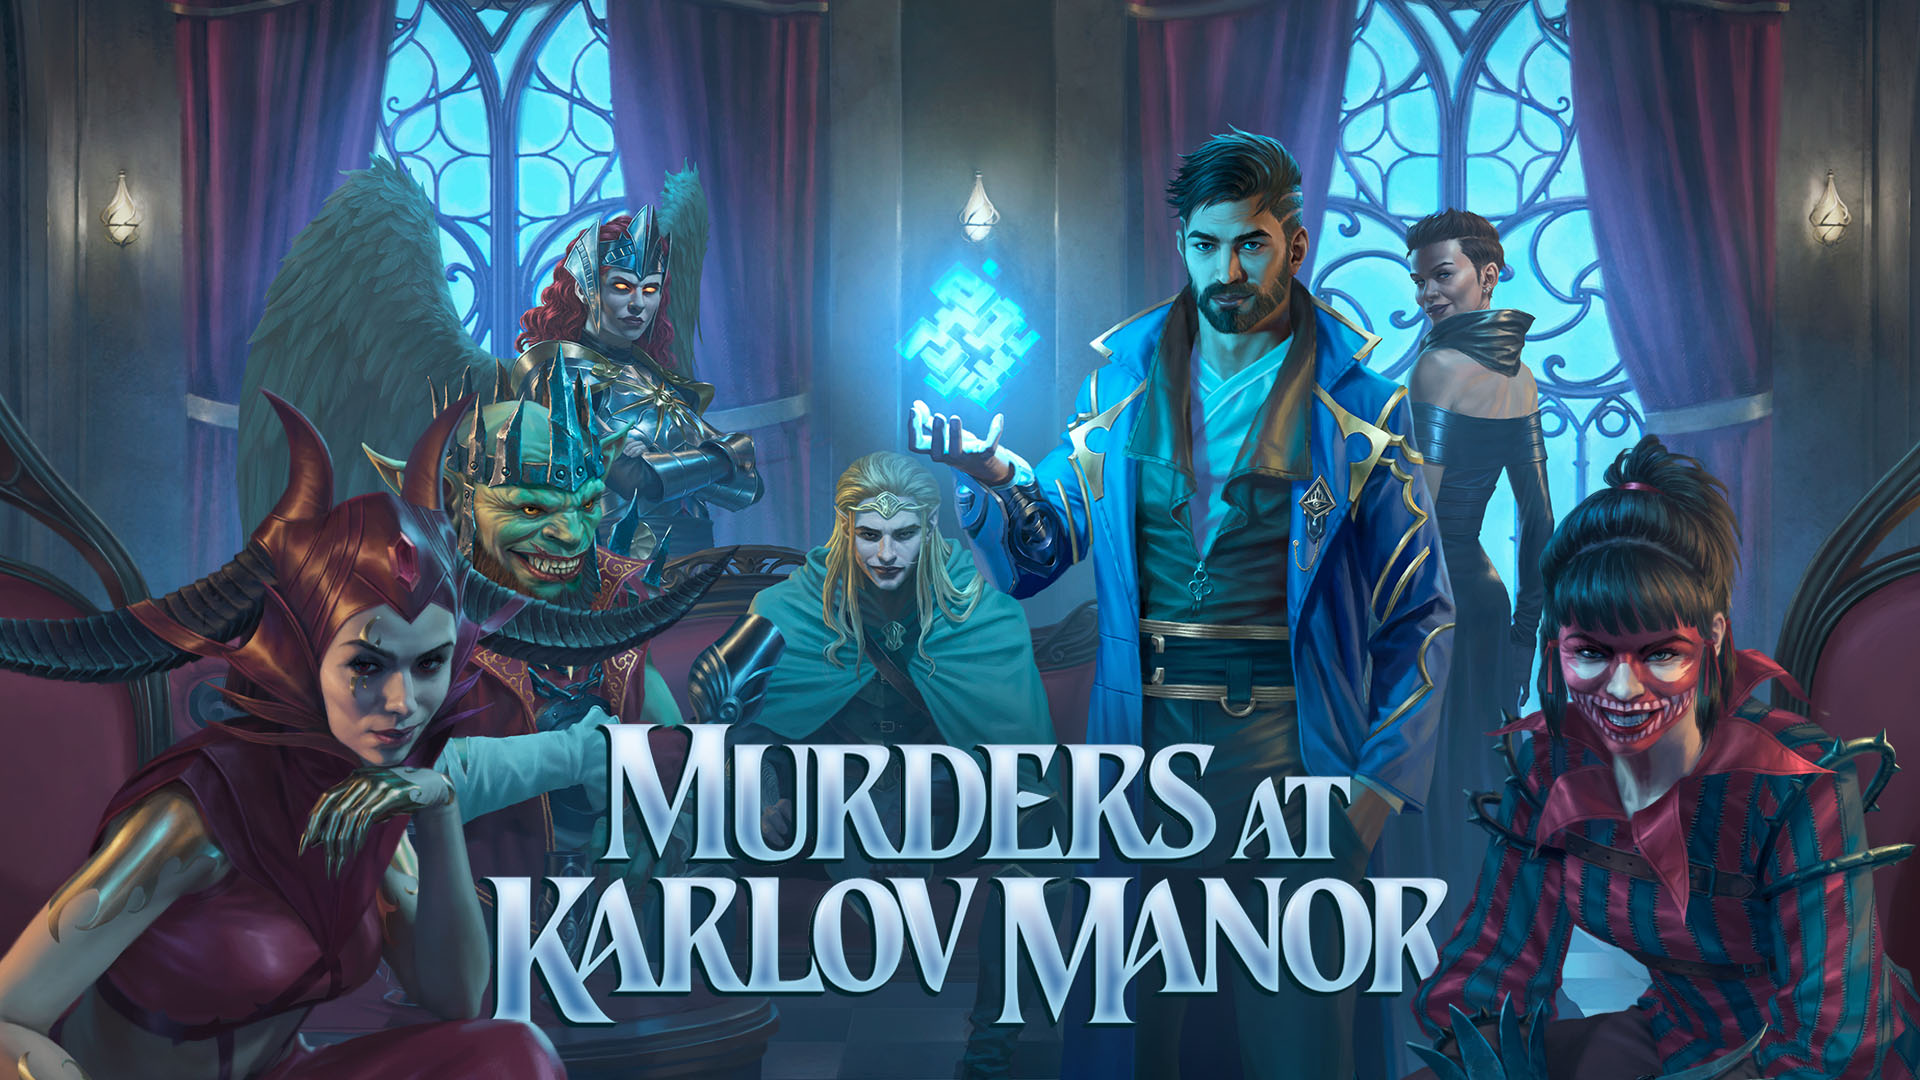 Murders at Karlov Manor logo featuring the main characters from the Magic stories posing in an elegant room